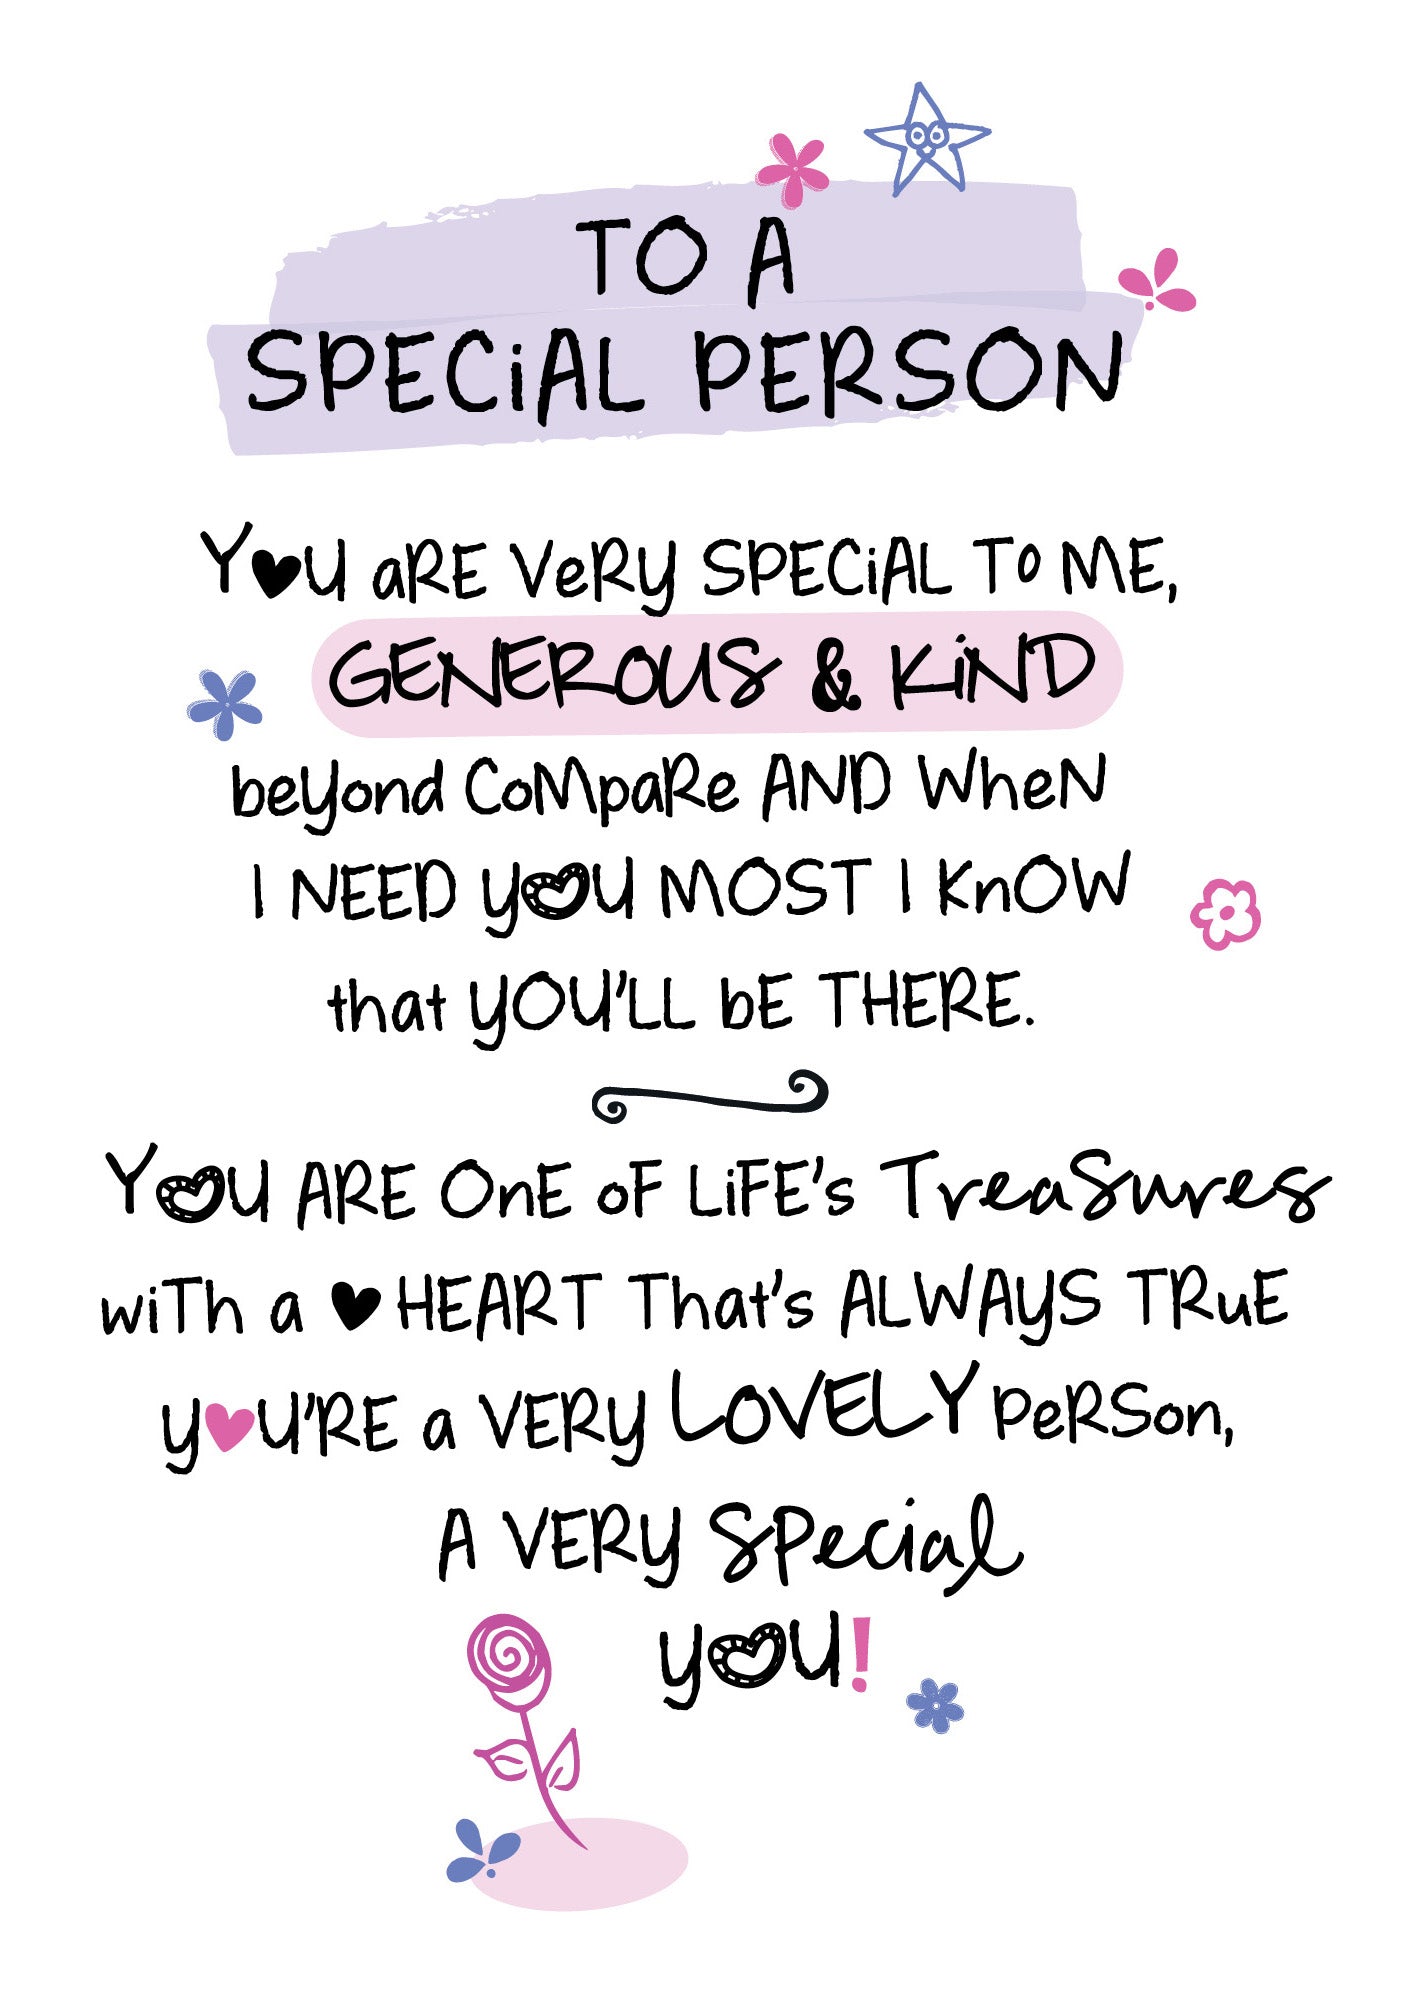 To A Special Person Inspired Words Greeting Card Blank Inside